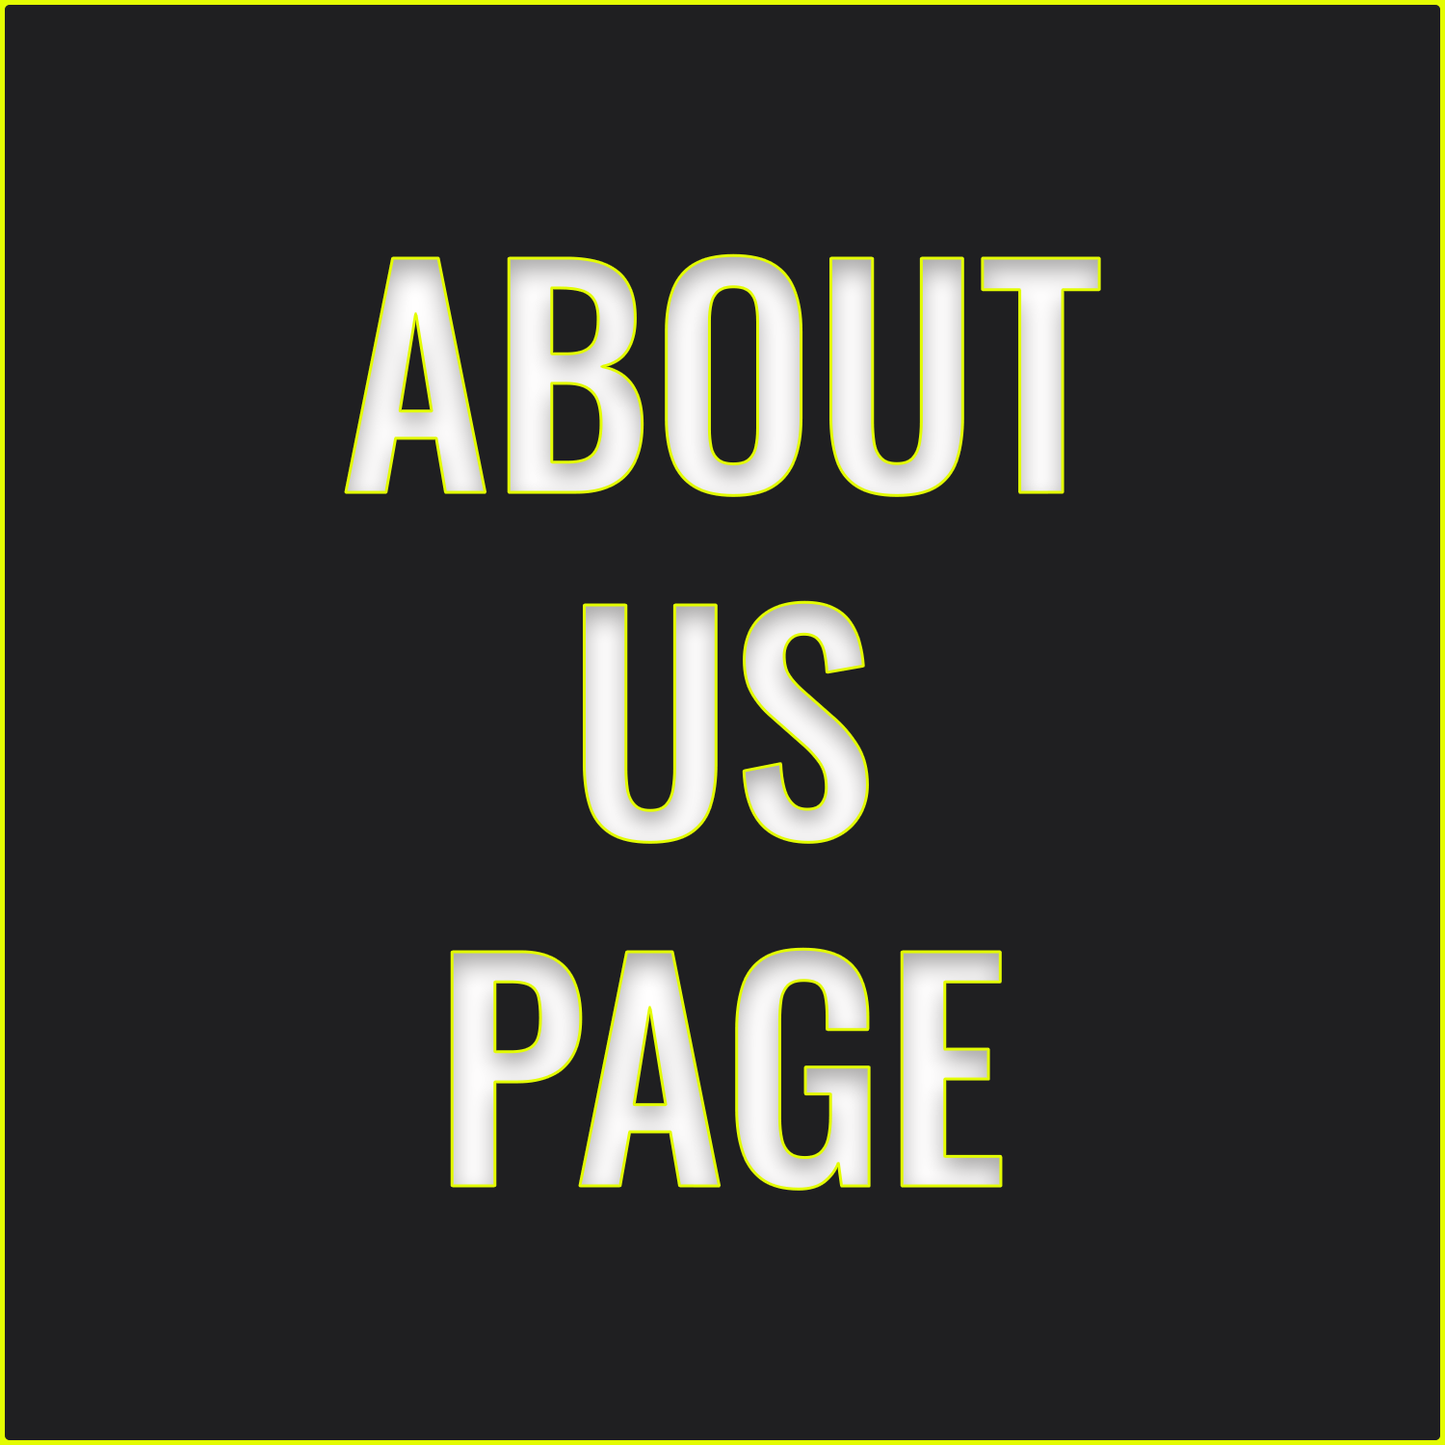 Create About Us Page On Website